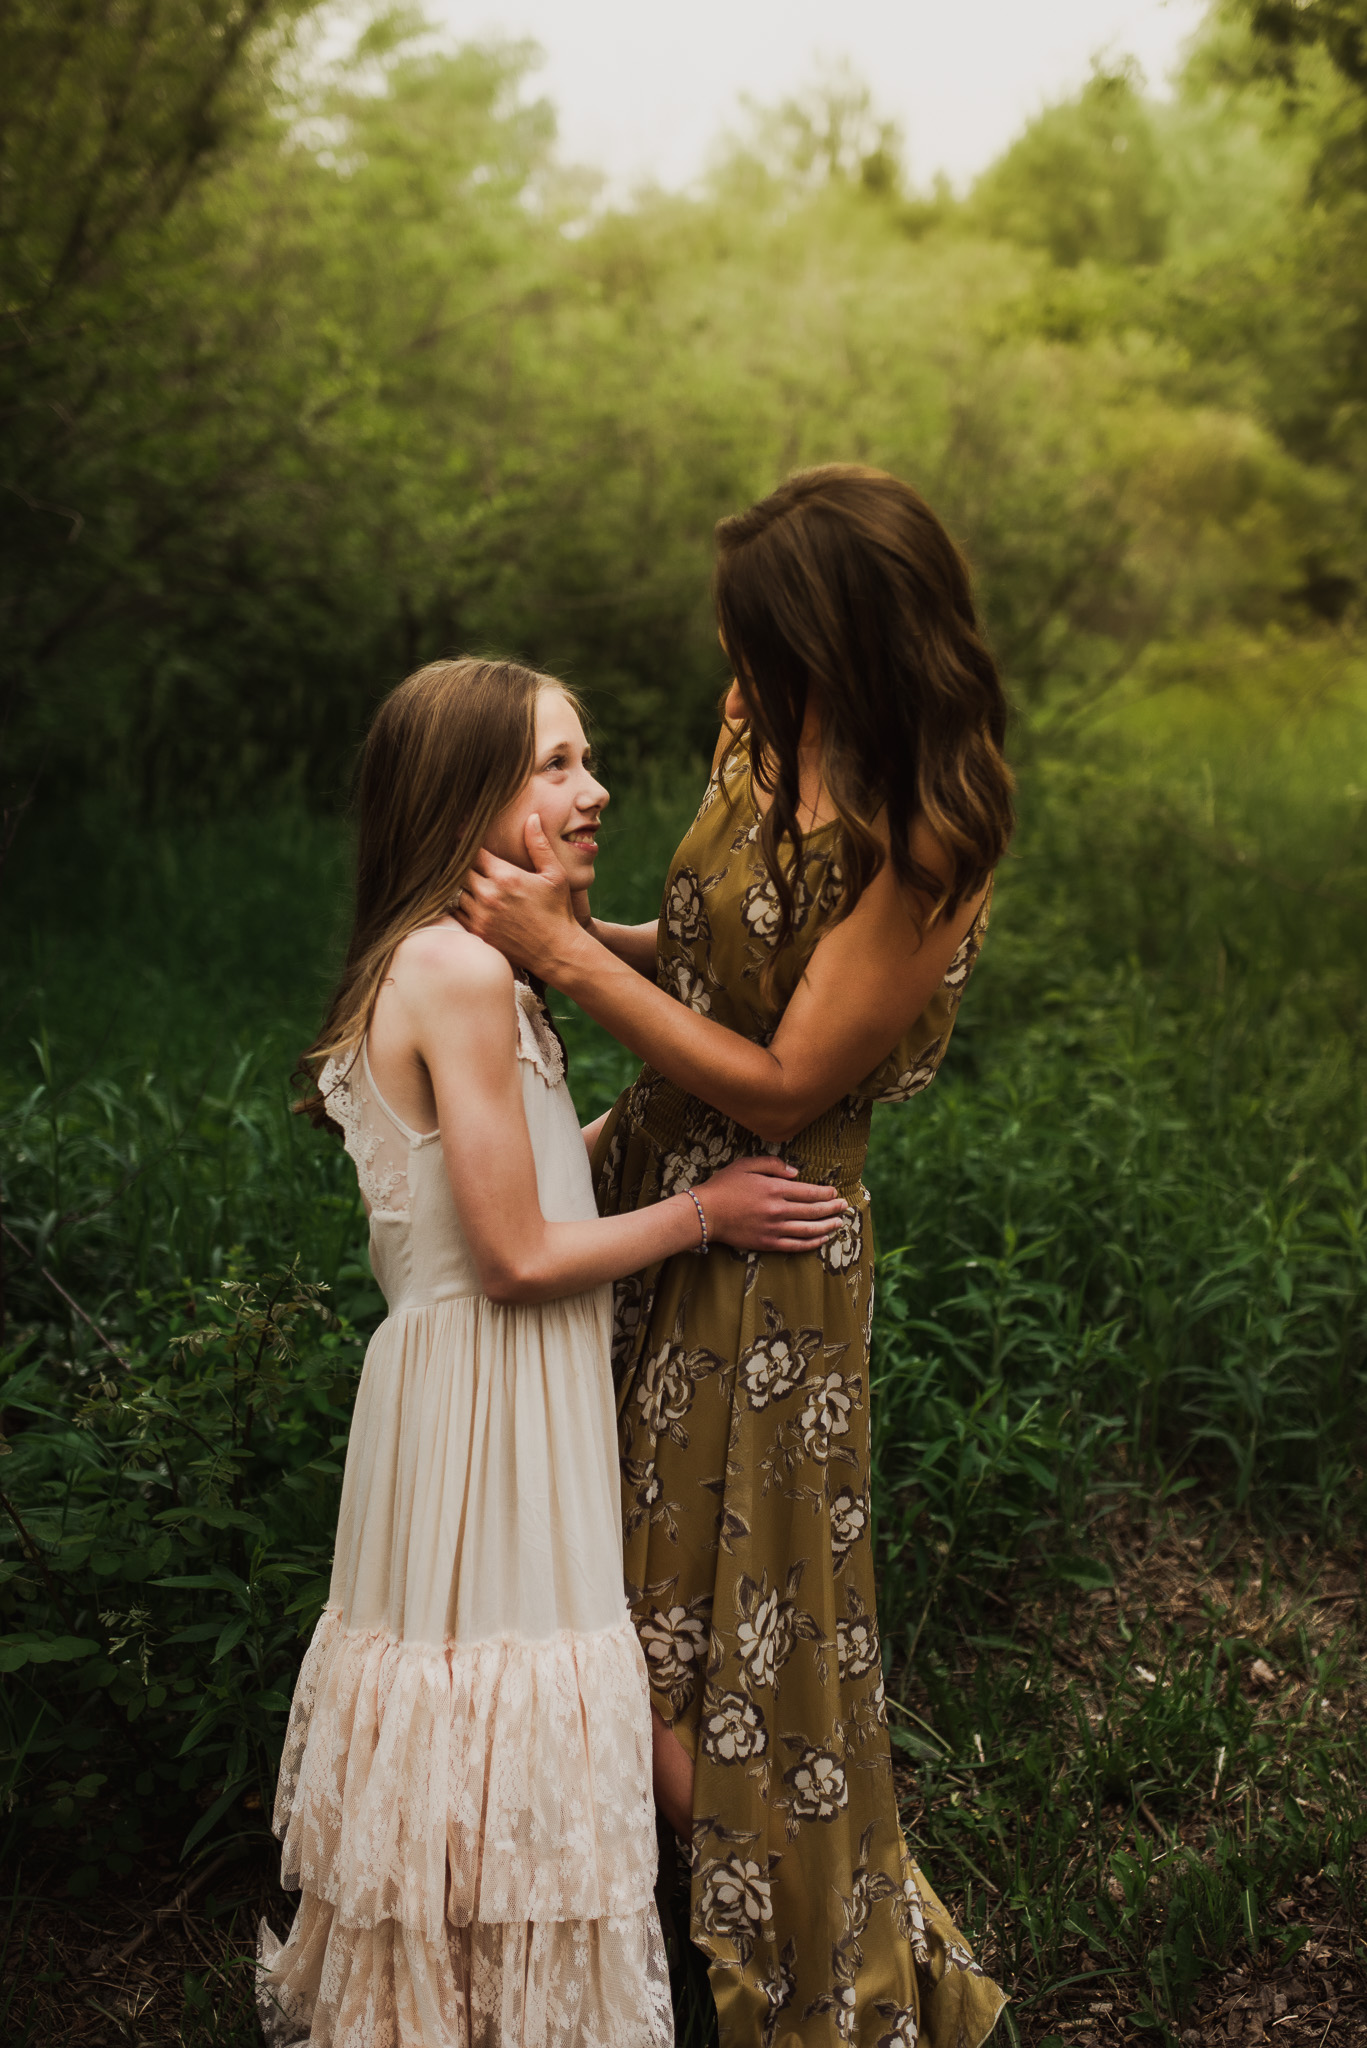 Mother and daughter looking at each other during a sunset photo shoot.